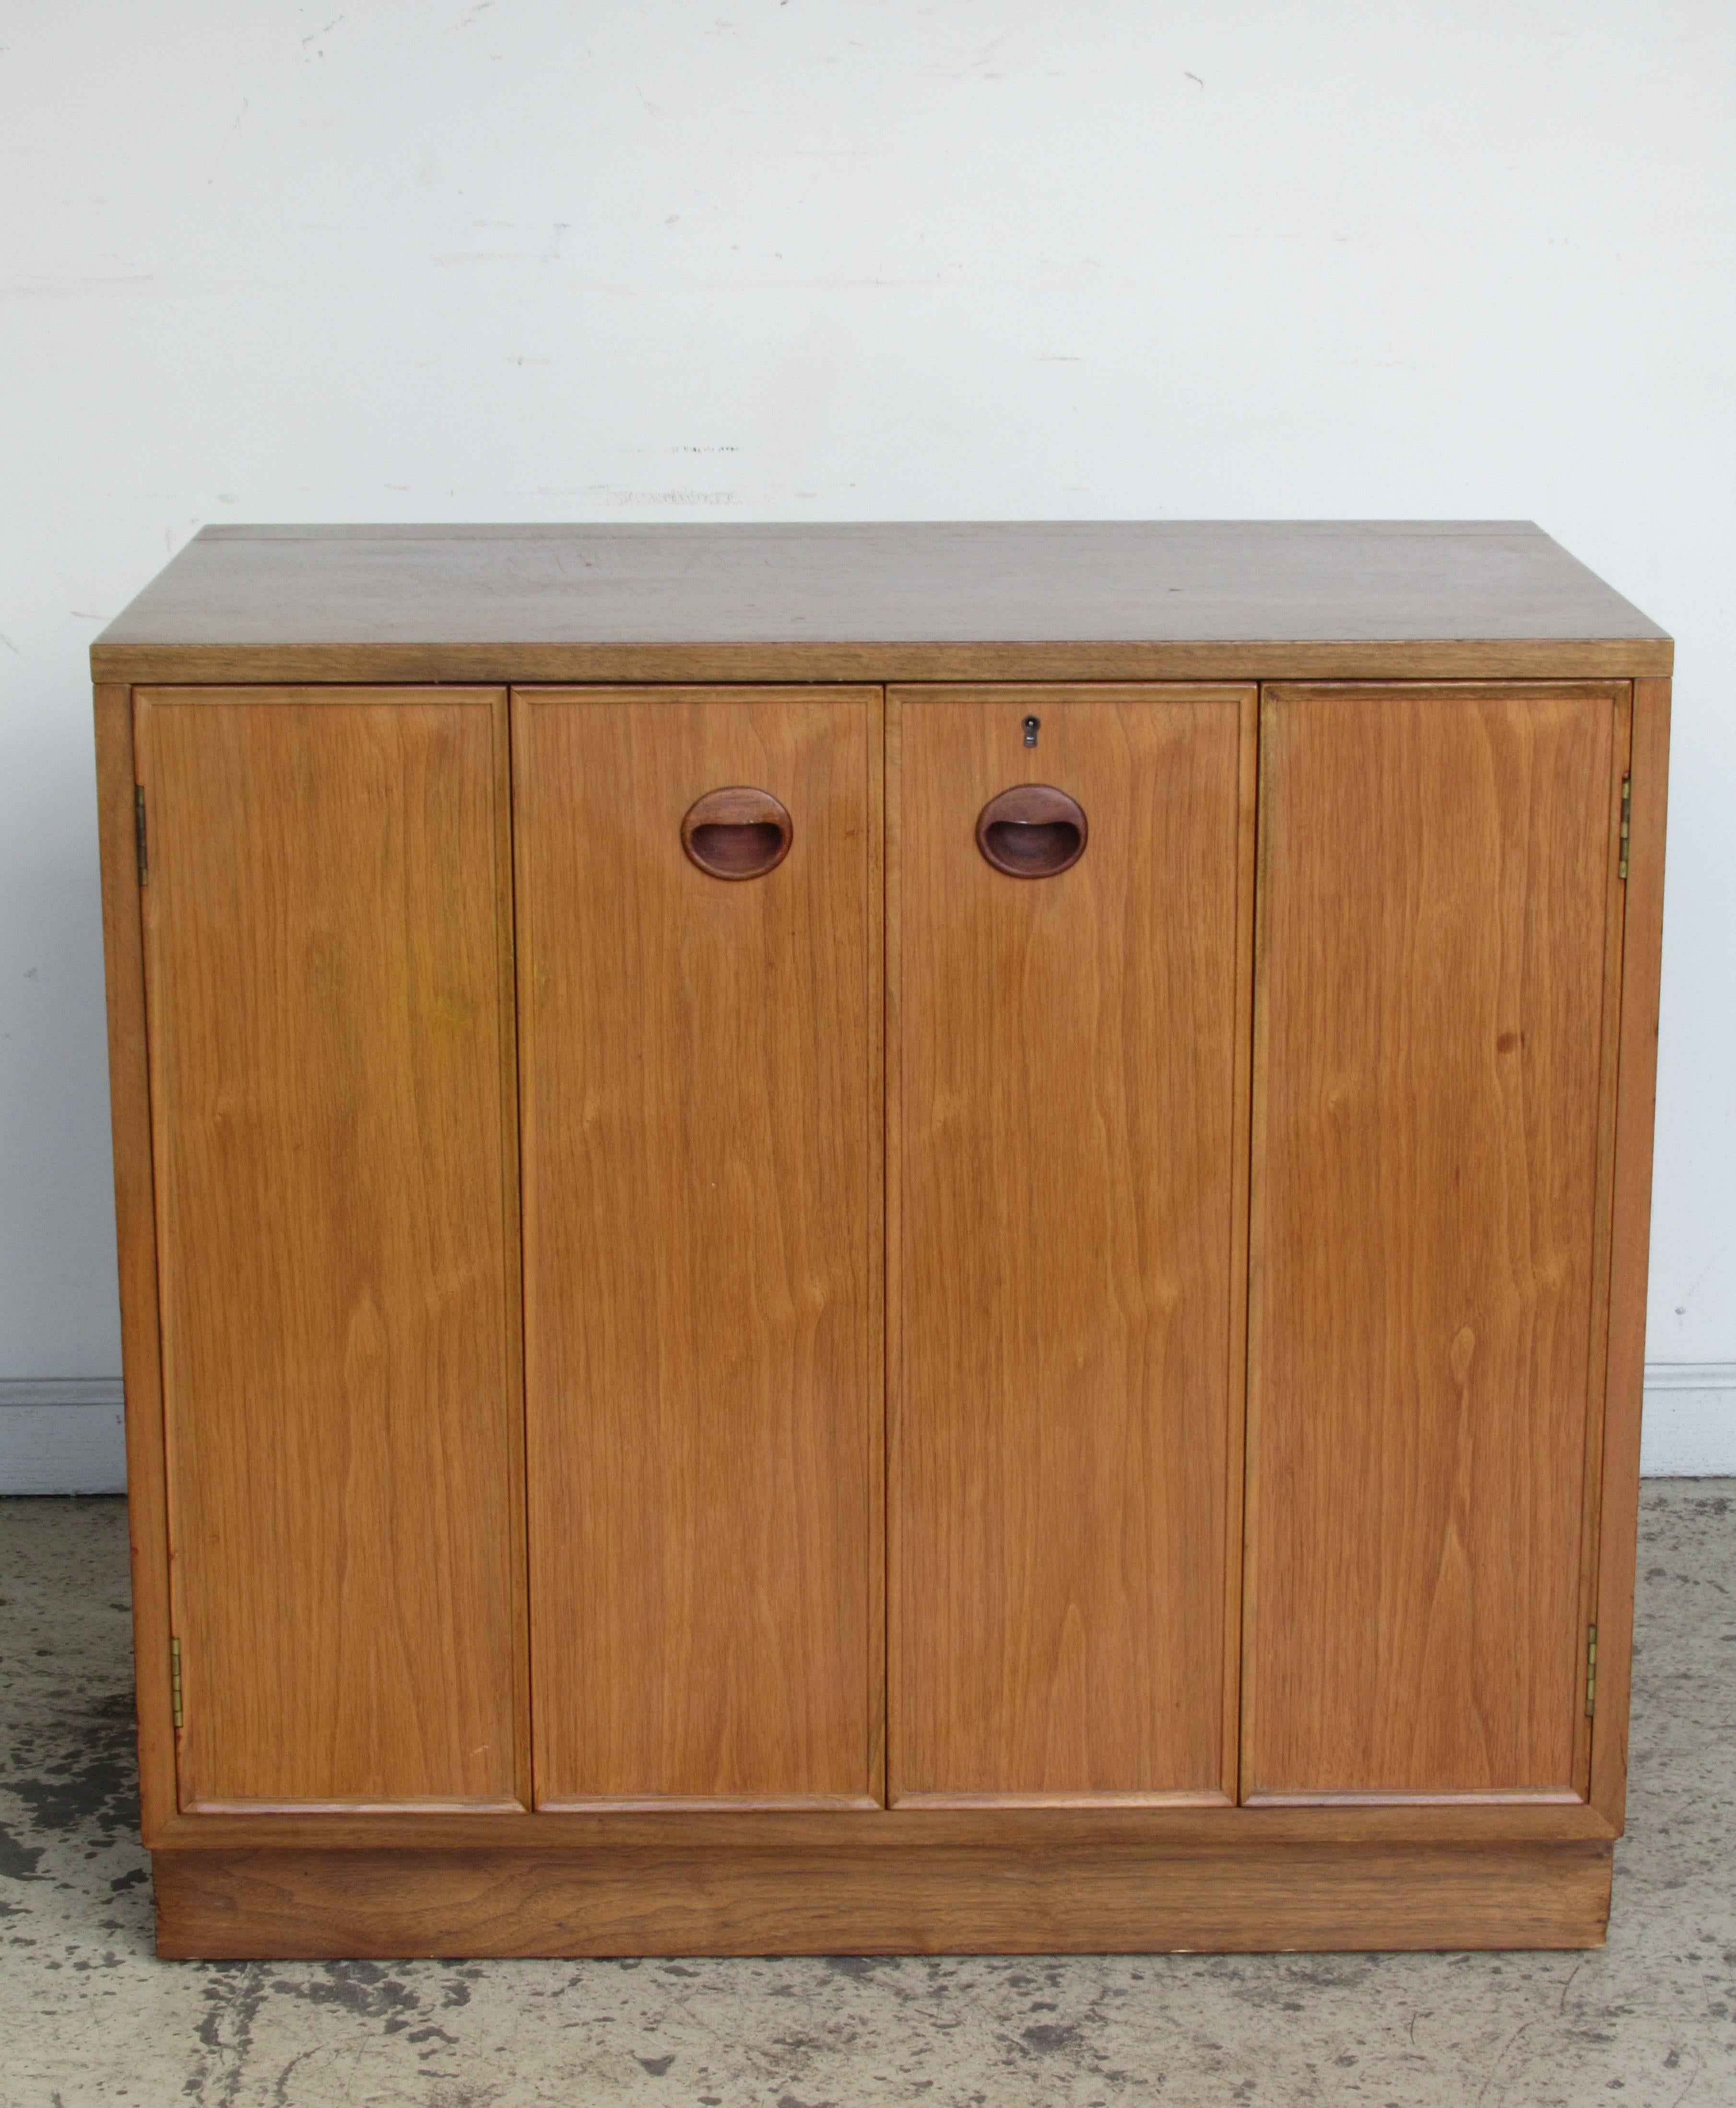 A walnut dry bar cabinet by Edward Wormley for Dunbar. The cabinet with a brass hinged lift top / two-fold accordion doors / fitted interior of 1 -2 white laminate top shelves / two sliding drawers and two open compartments. Great compact size that